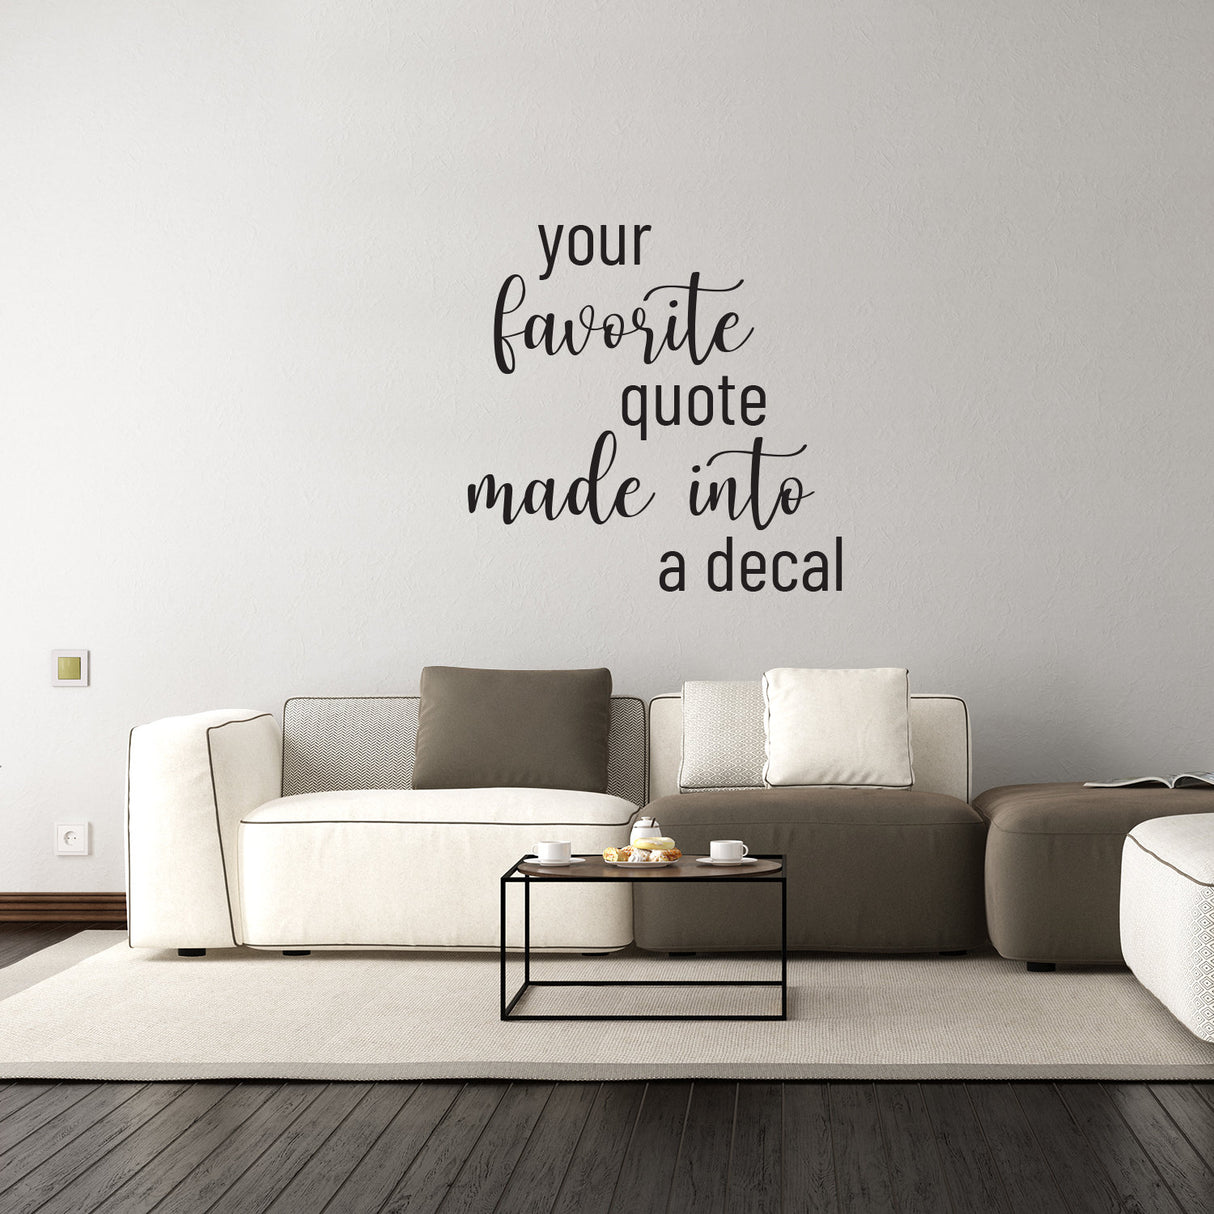 Customized Wall Decal - Personalized Statement Vinyl Lettering Sticker